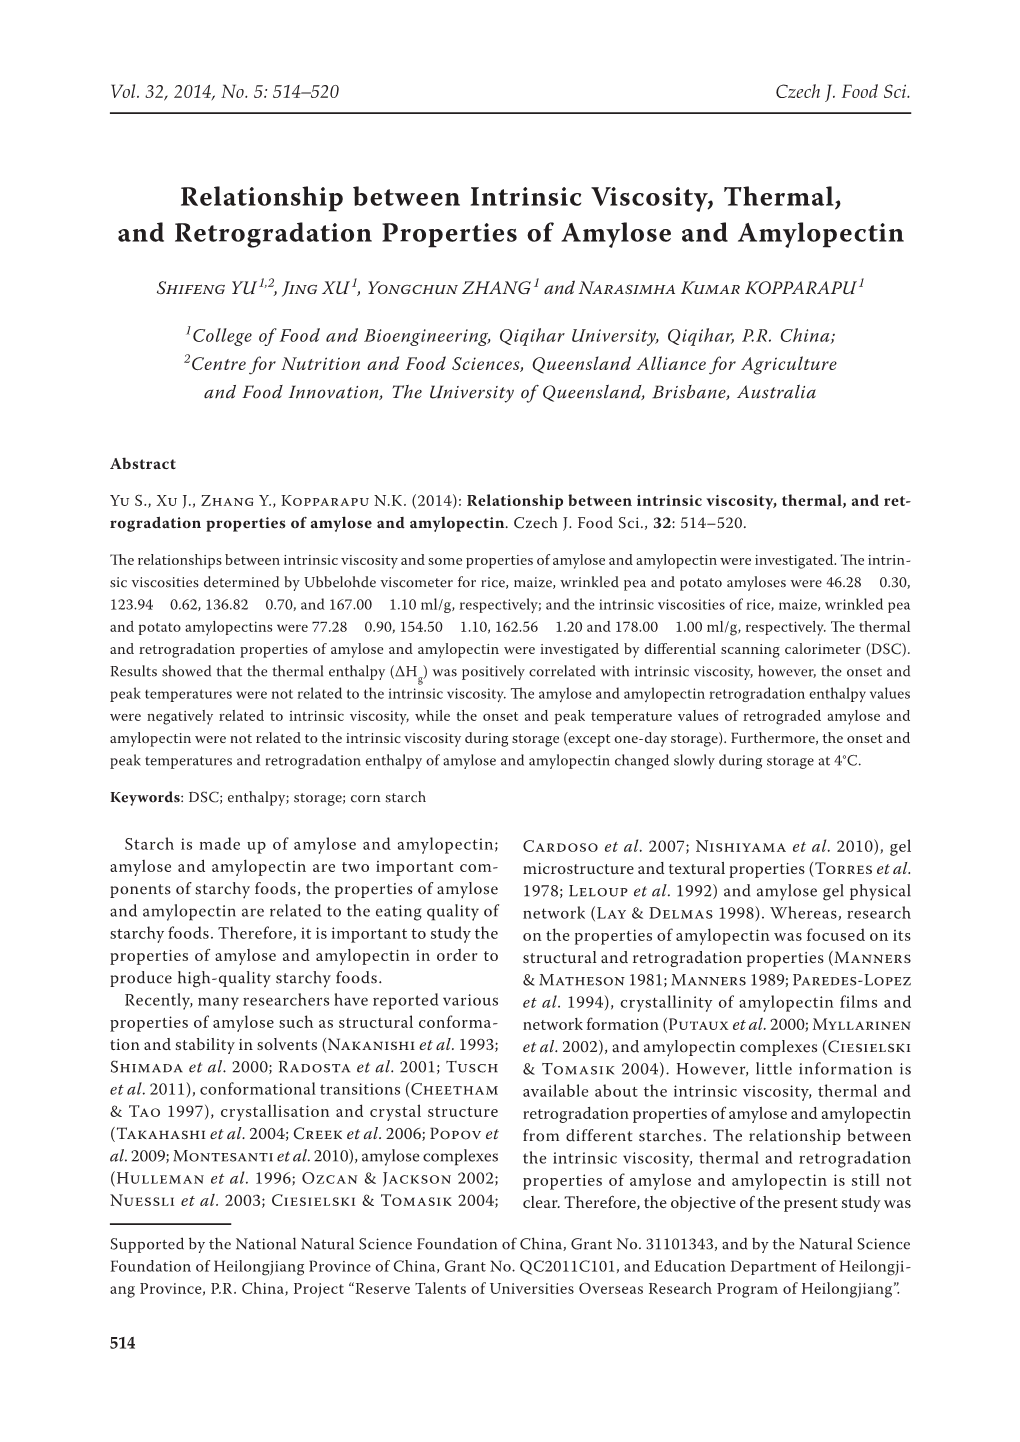 Relationship Between Intrinsic Viscosity, Thermal, and Retrogradation Properties of Amylose and Amylopectin